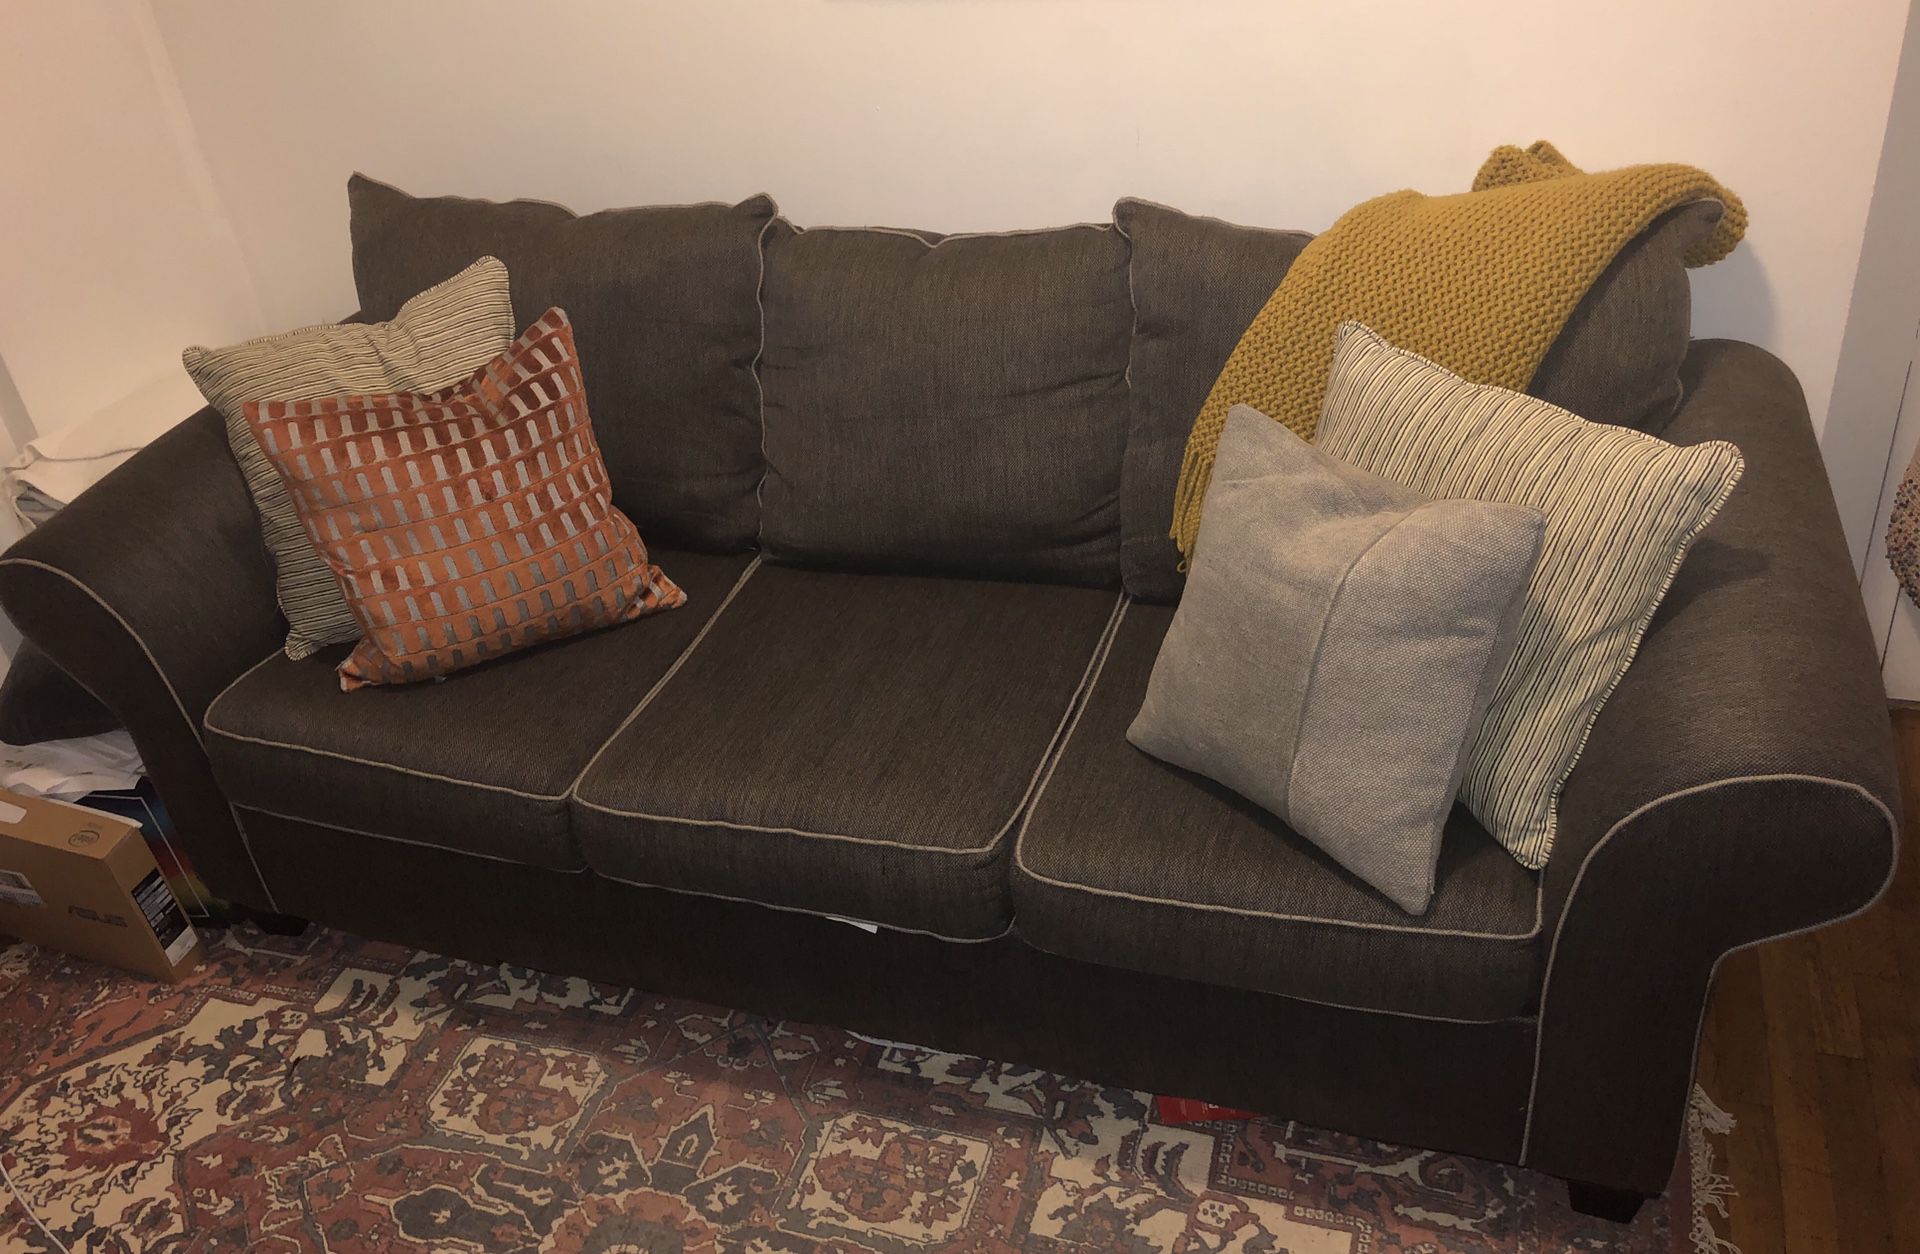 FREE - Large 3 person couch for sale